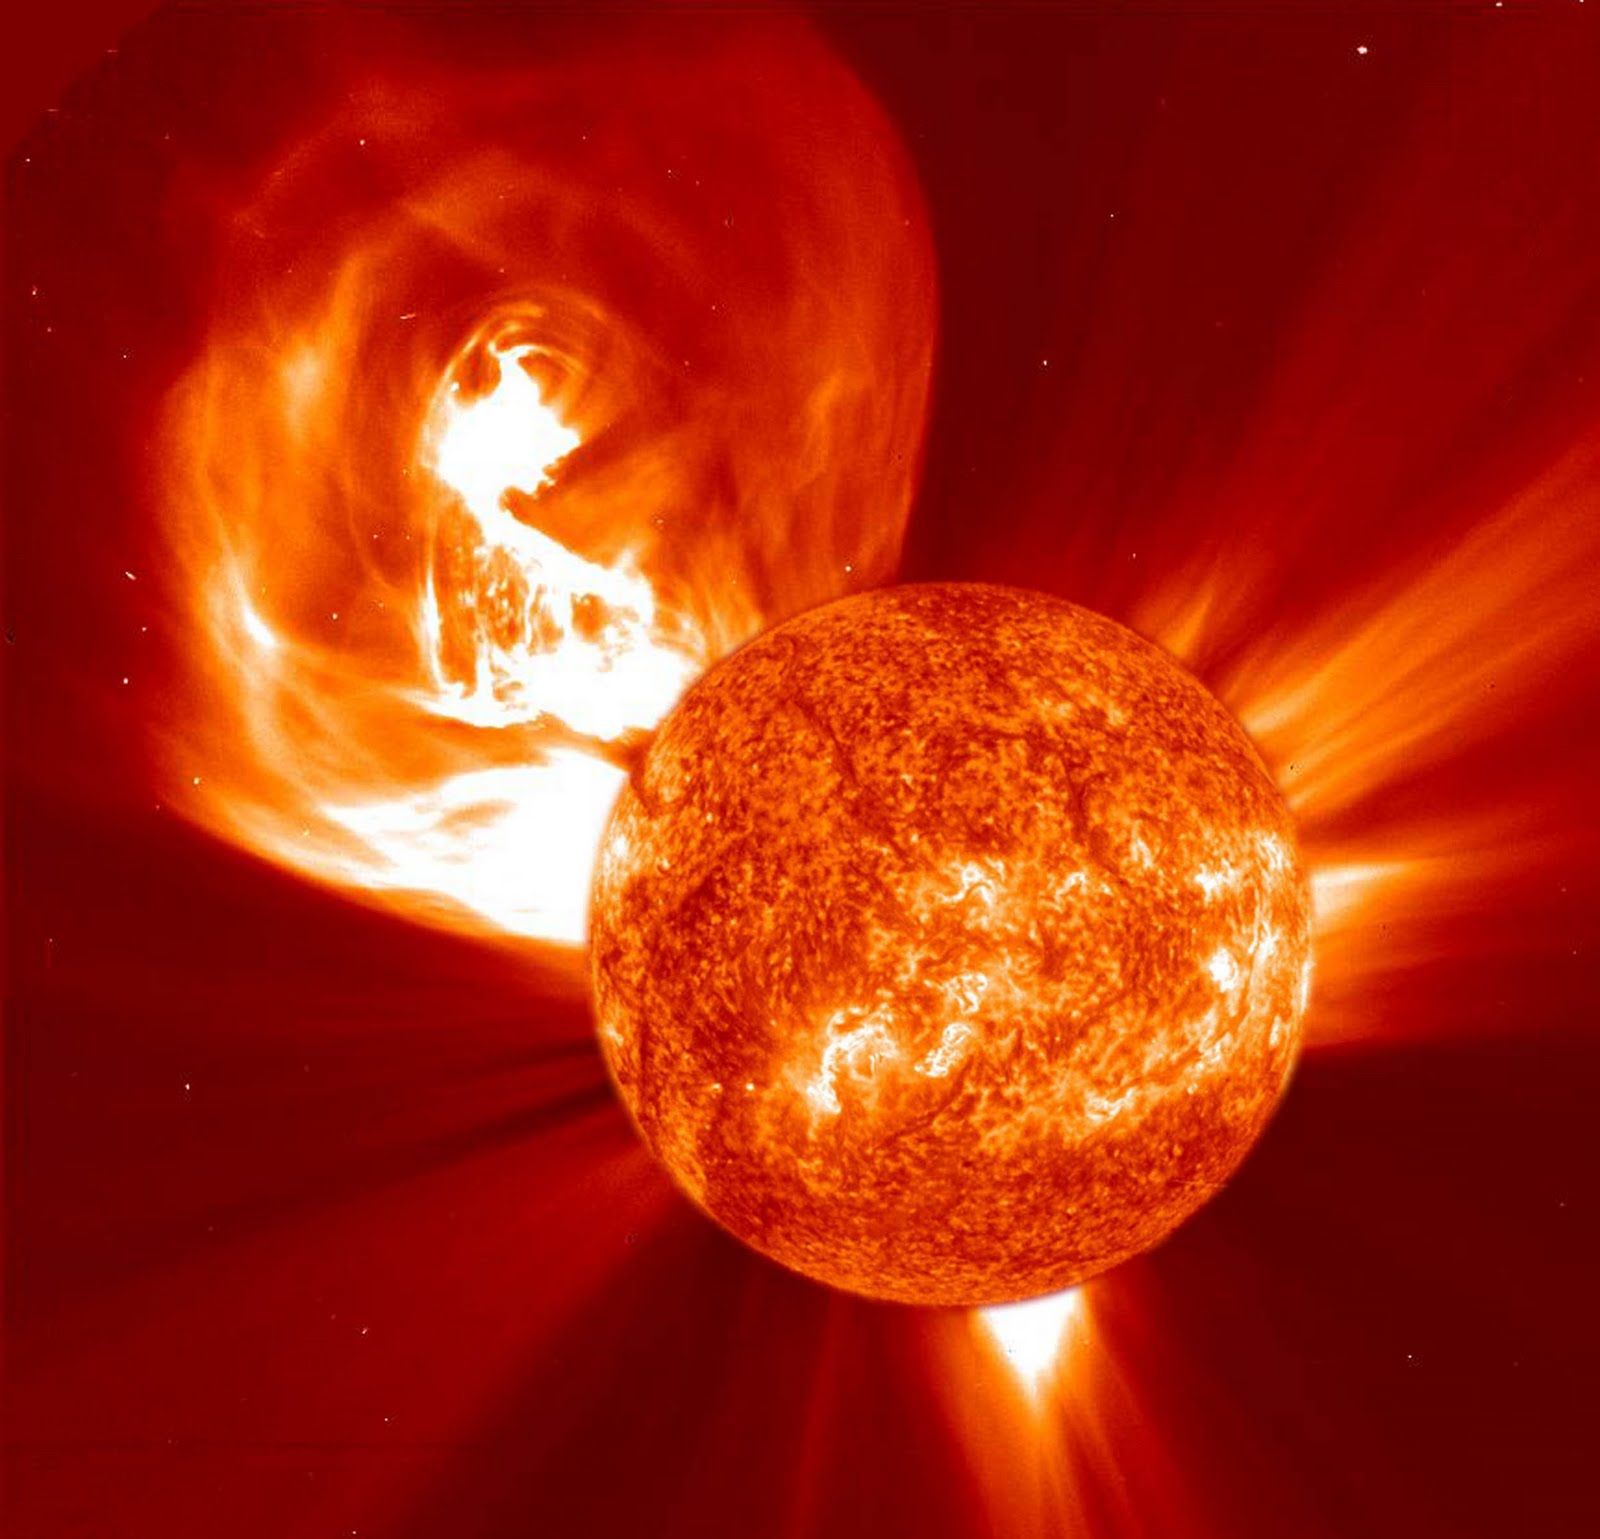 Solar Flares 2012 Is It The Sun's Final Assault on Earth? THE